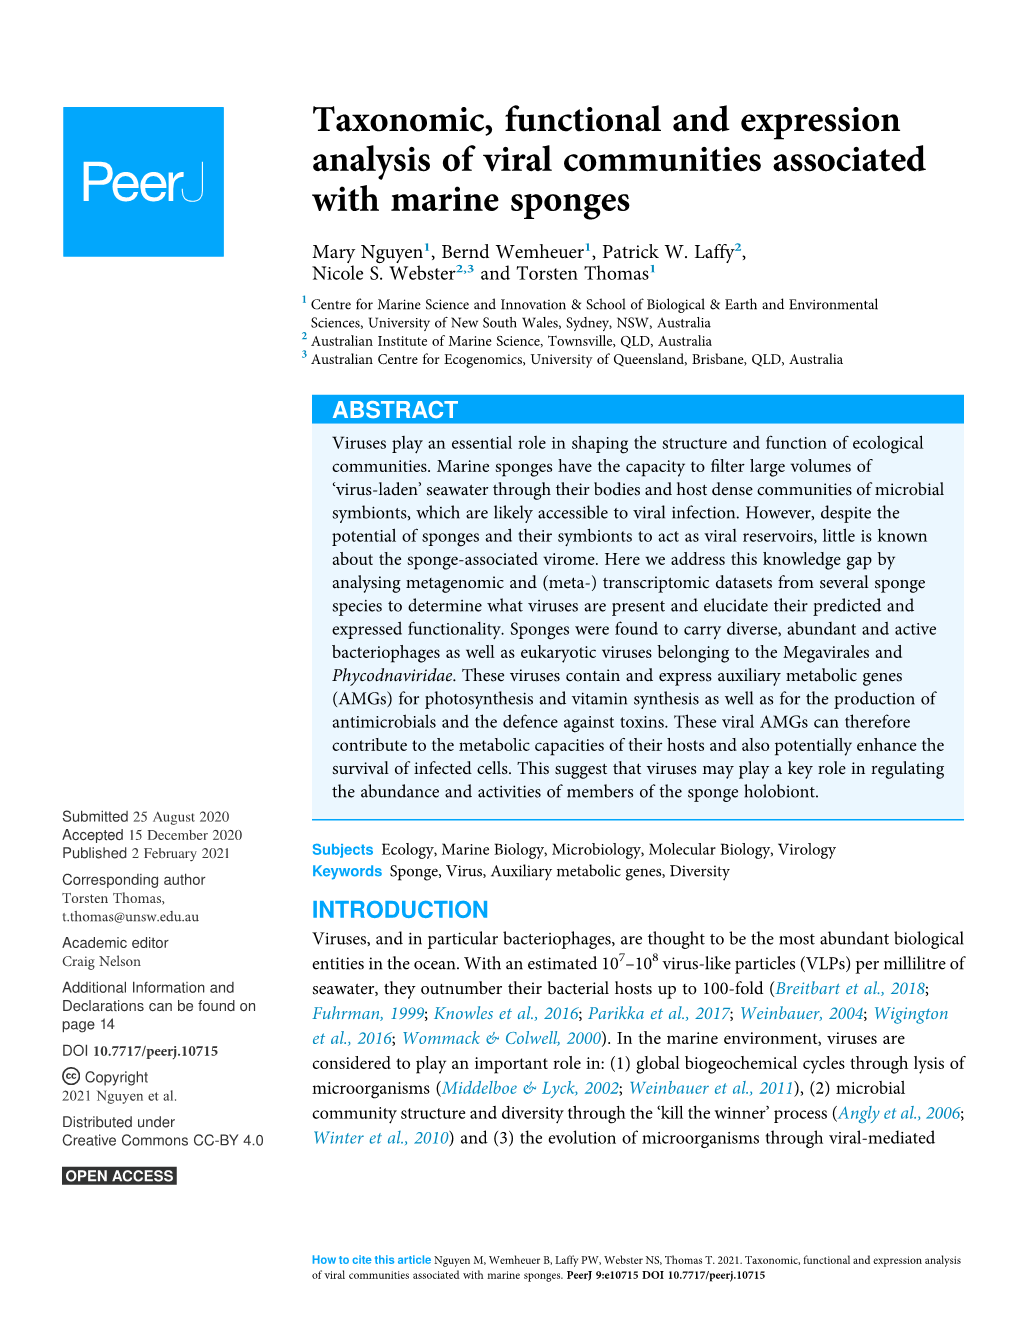 Taxonomic, Functional and Expression Analysis of Viral Communities Associated with Marine Sponges